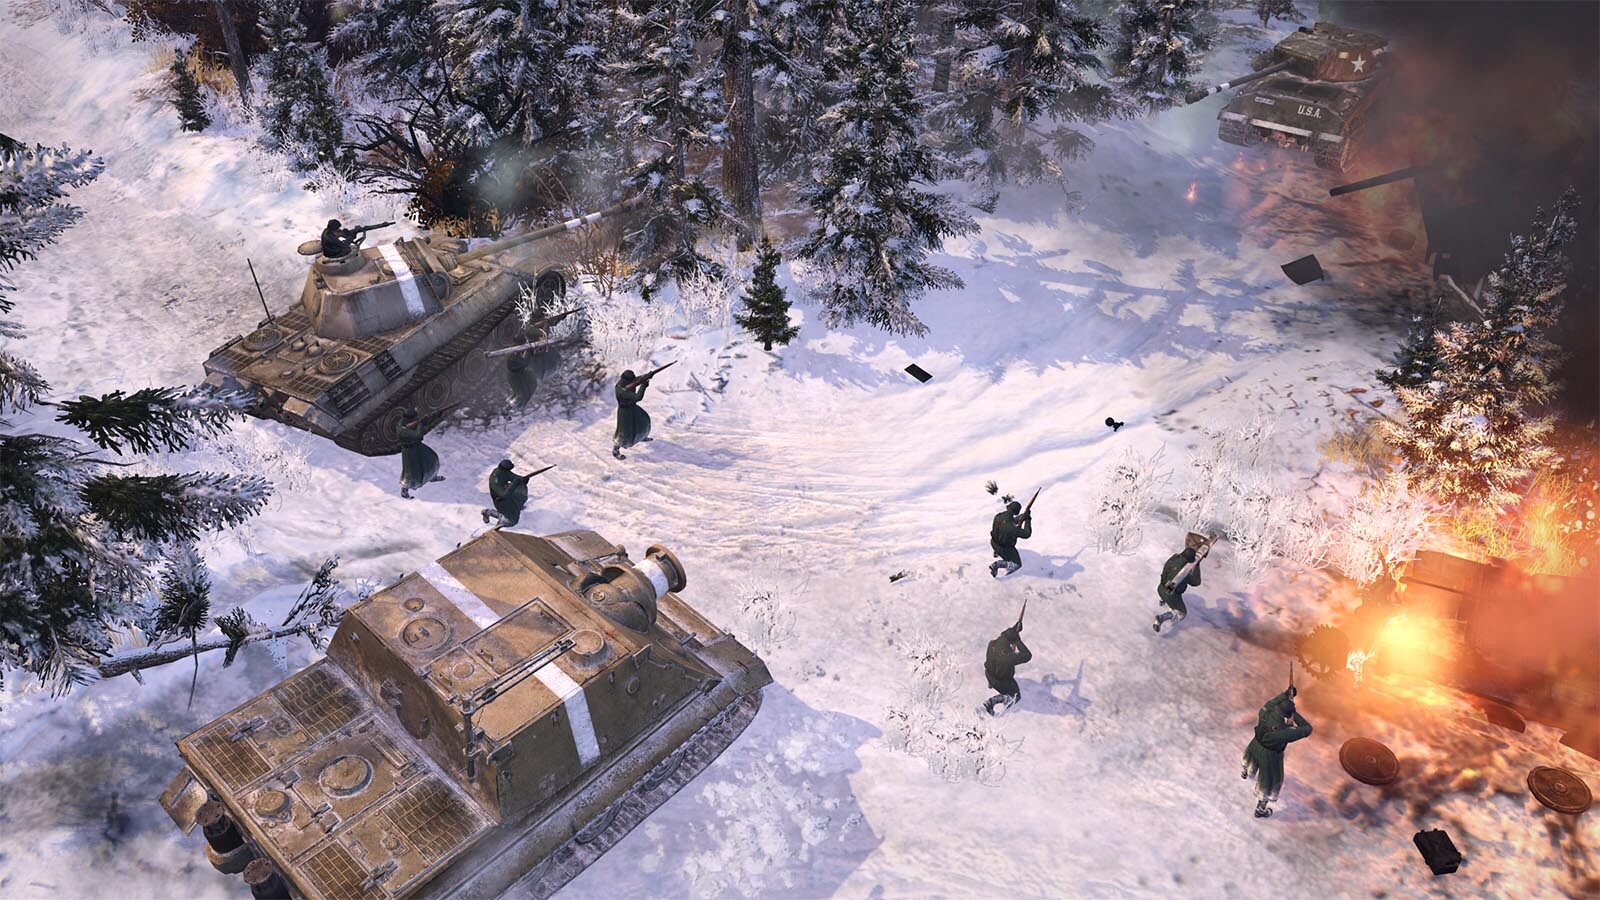 company of heroes 2 windows 10 compatibility